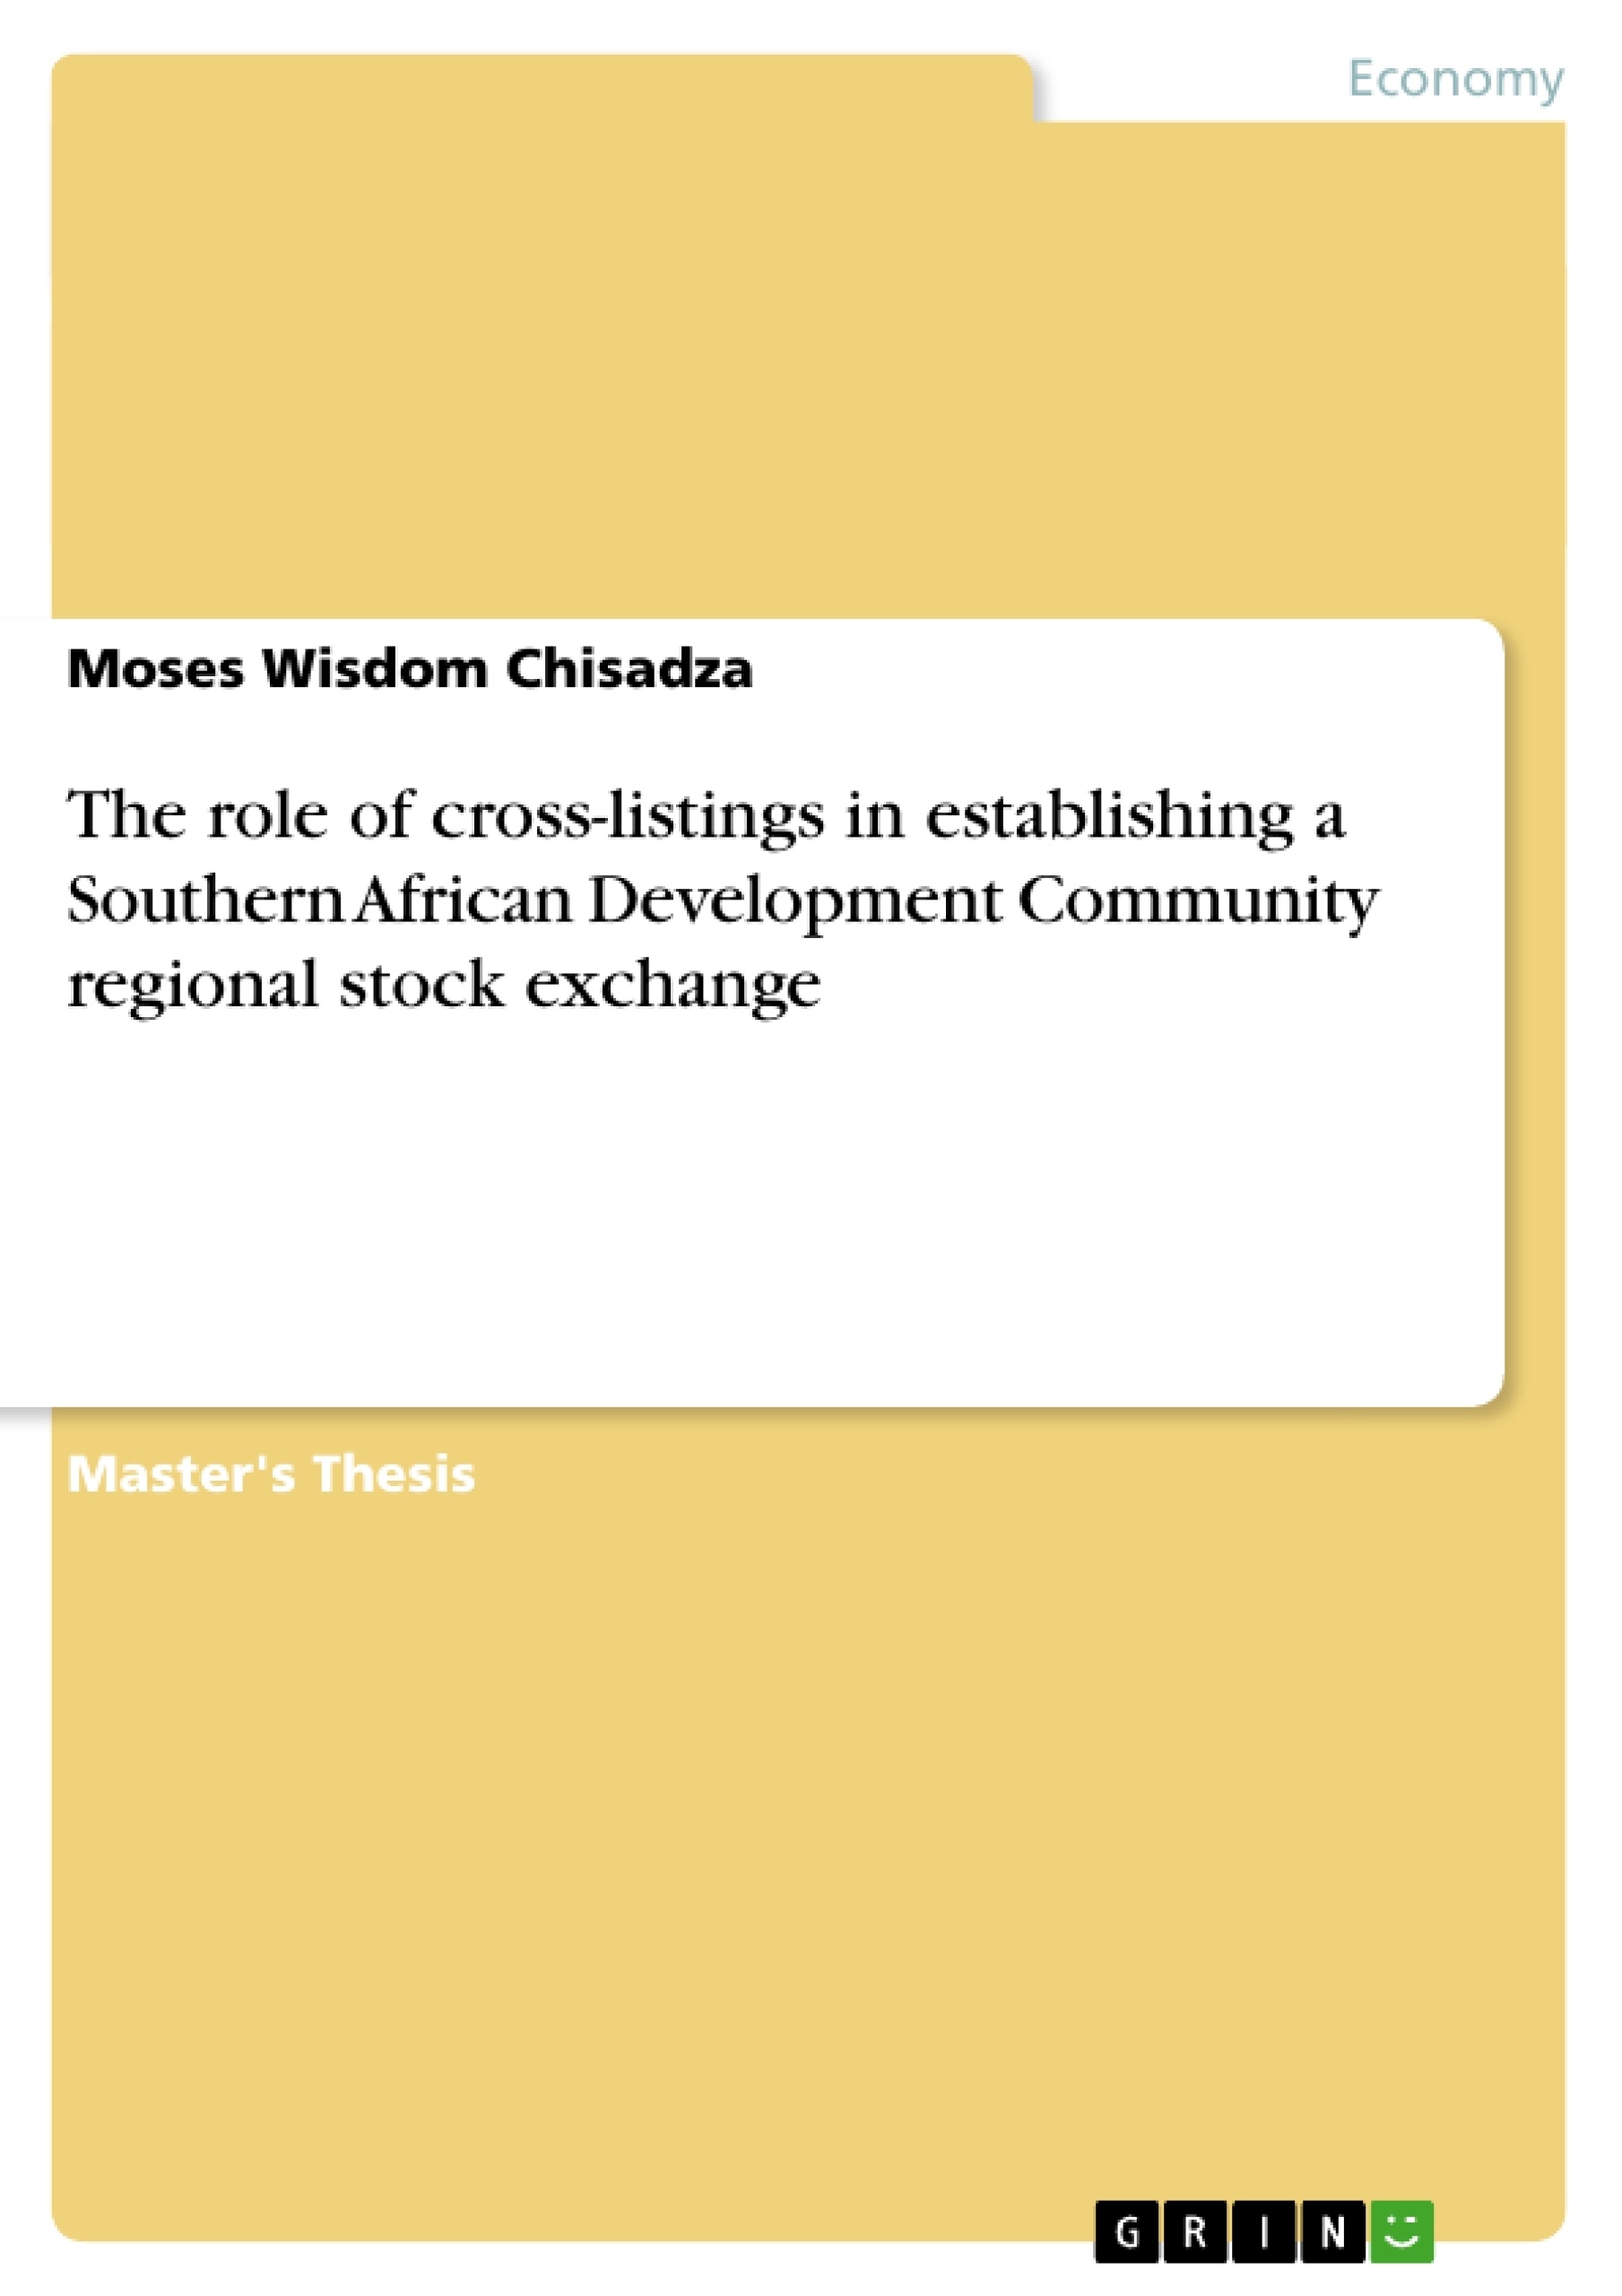 Titre: The role of cross-listings in establishing a Southern African Development Community regional stock exchange